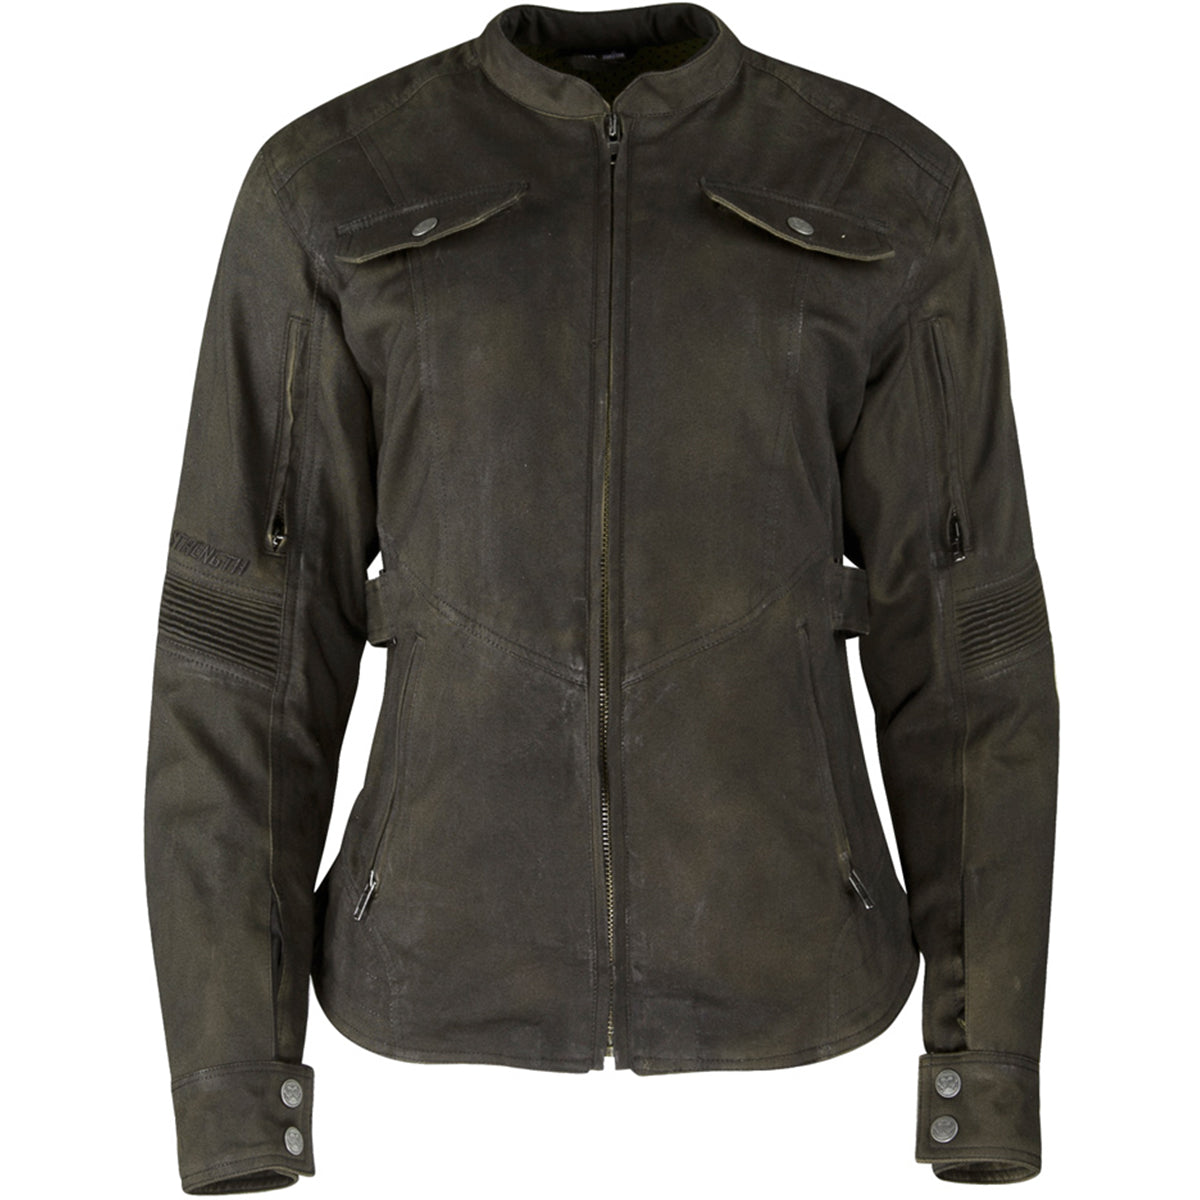 Speed & Strength Motorcycle Gear | Introducing The Fast Times Women's Street Jackets